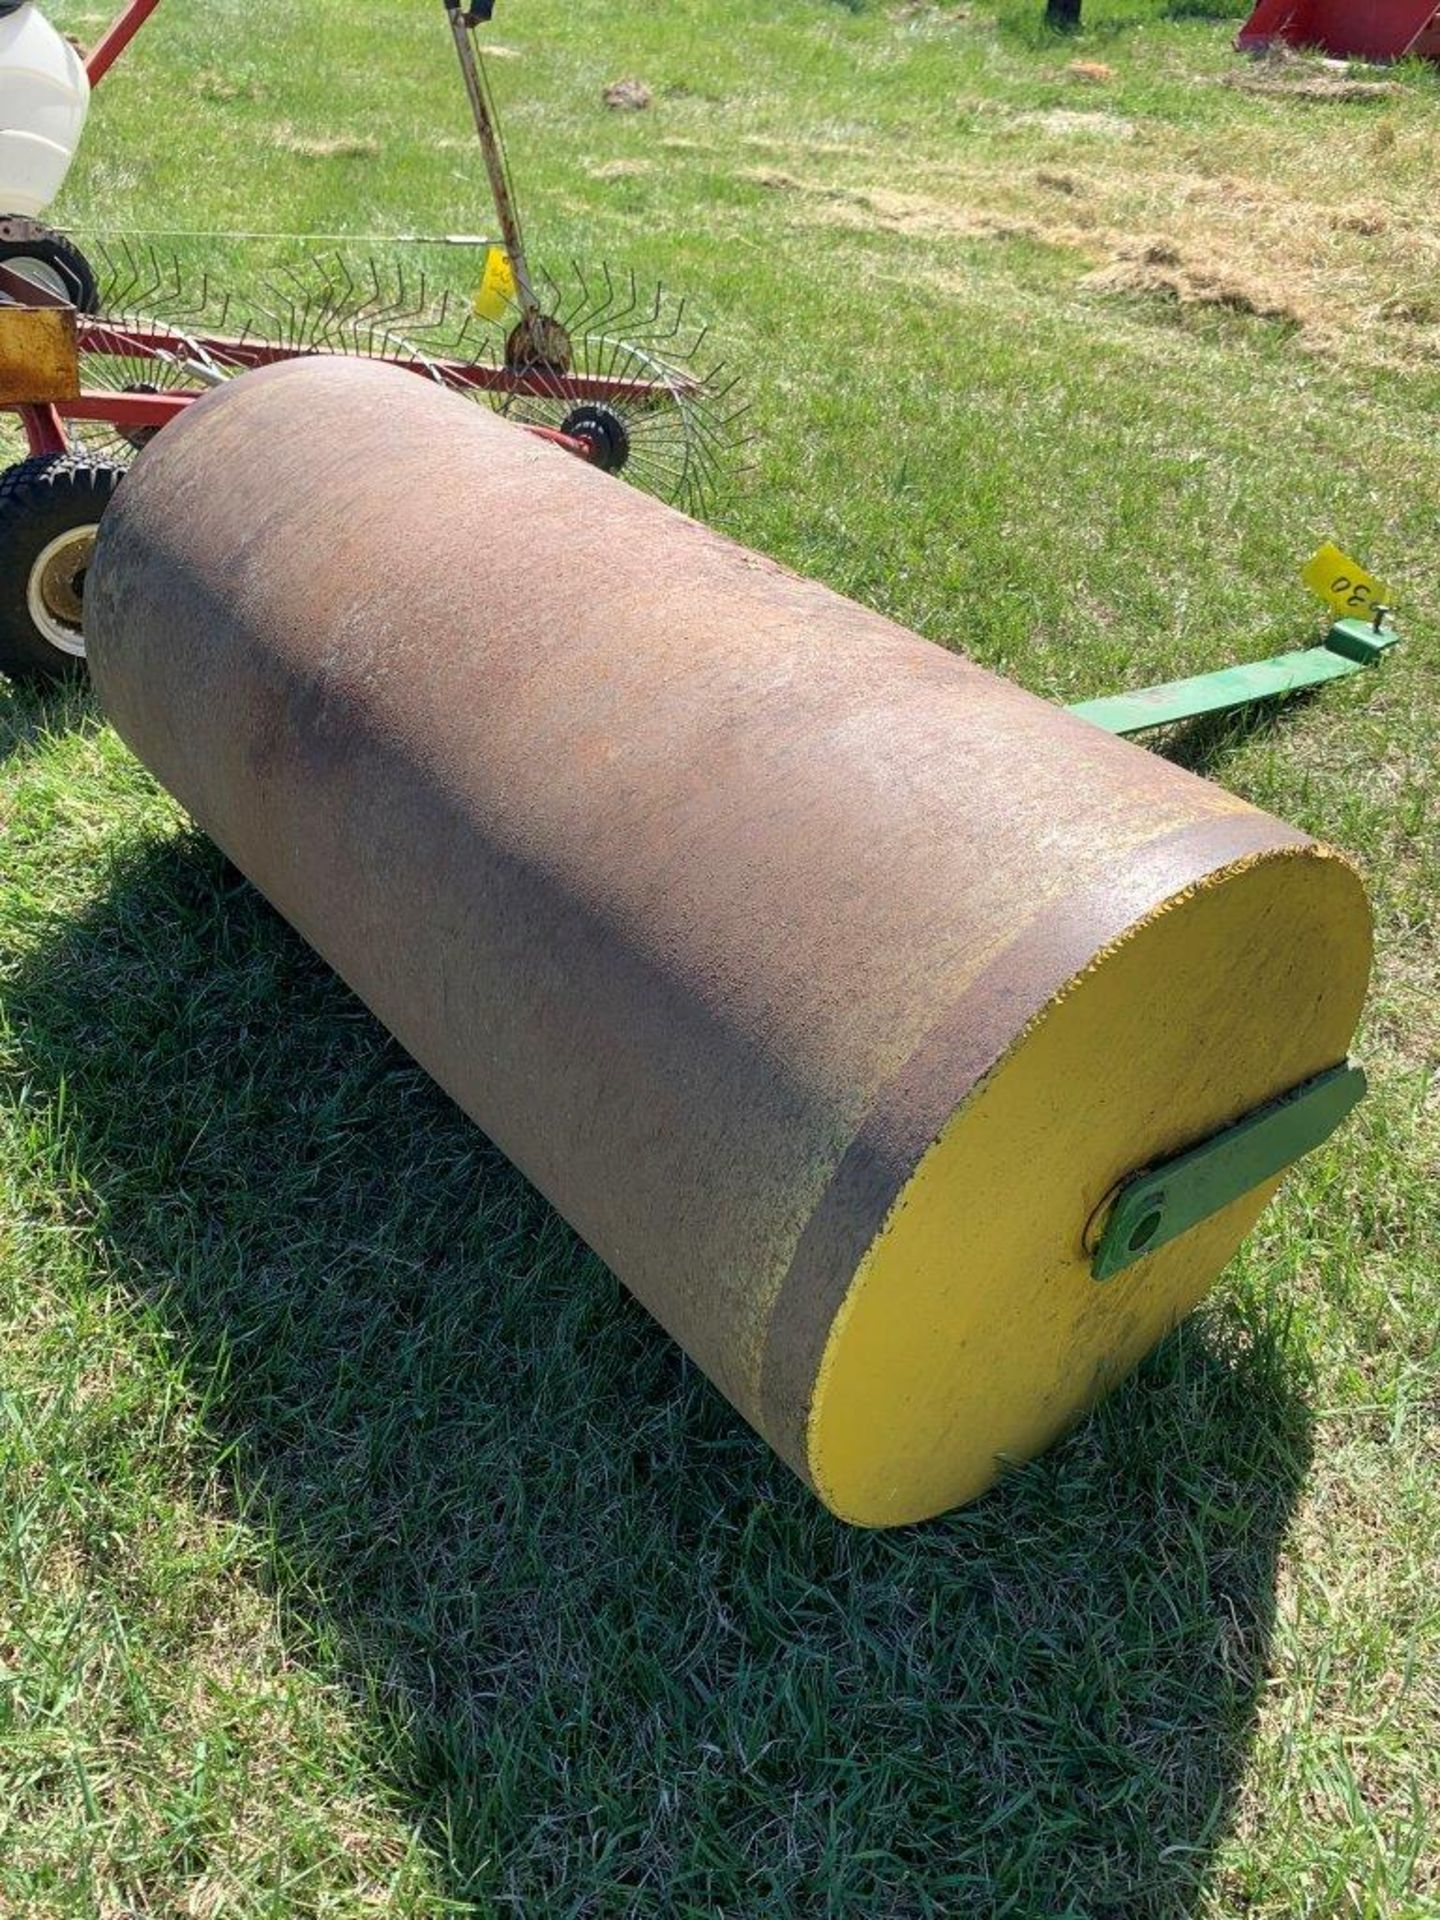 42" X 20" LAWN ROLLER (CONCRETE FILLED) - Image 2 of 3